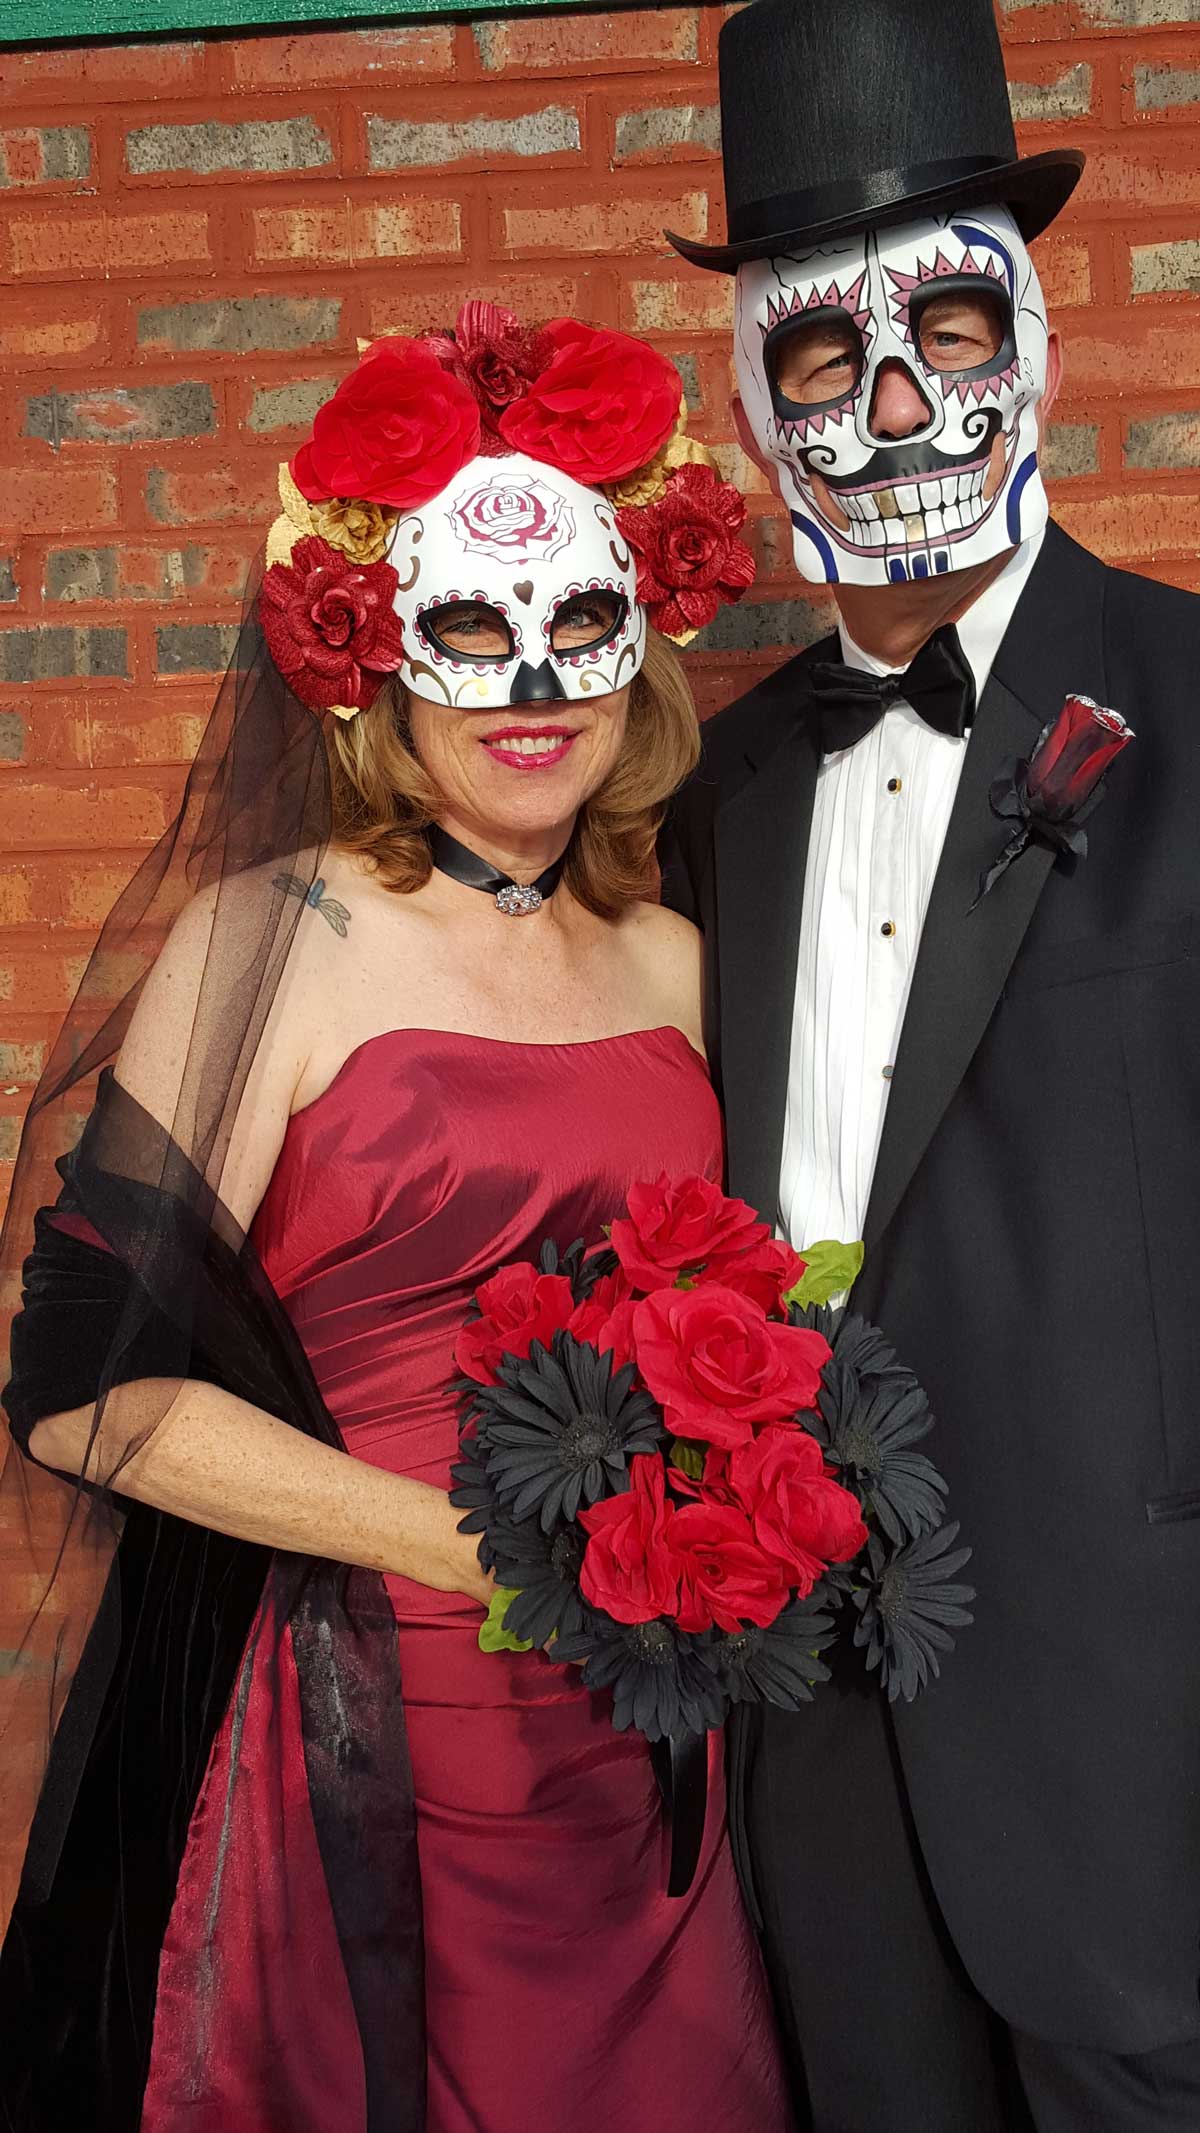 Big fans of Day of the Dead